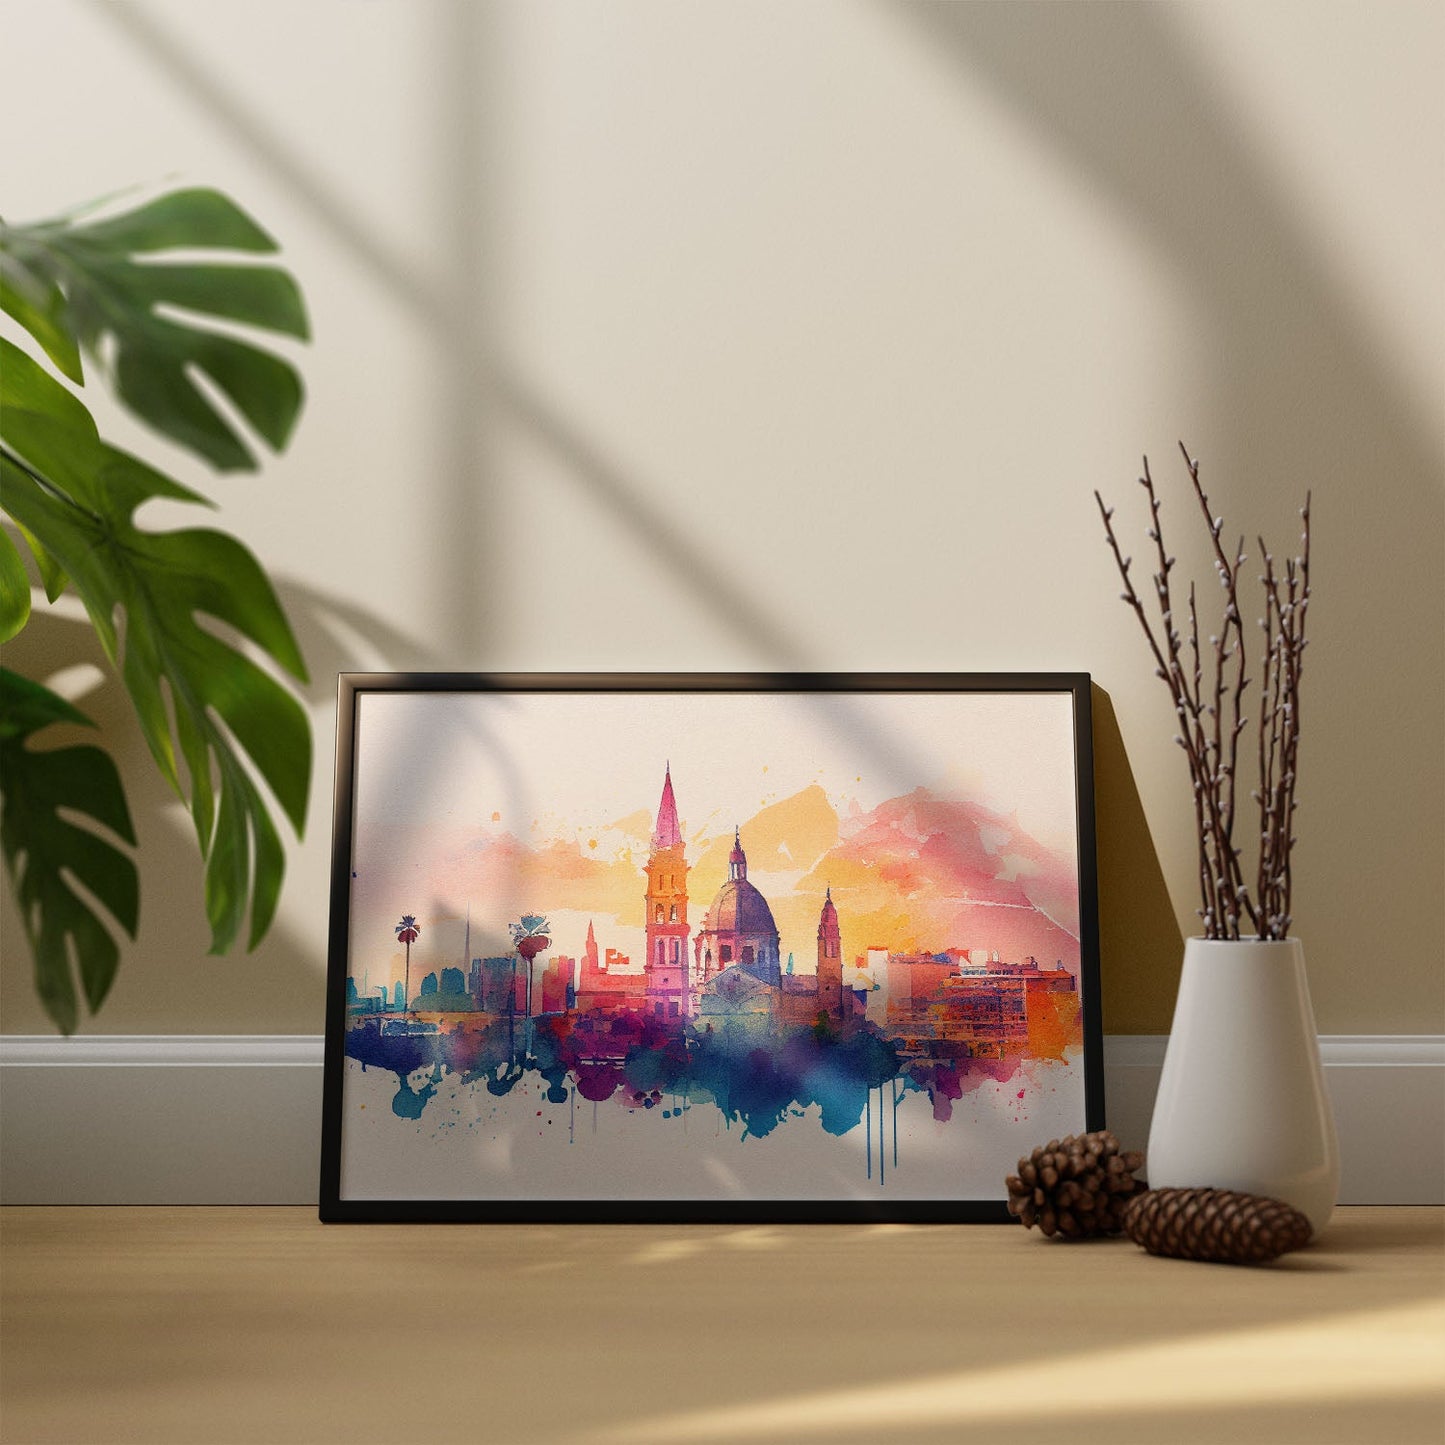 Nacnic watercolor of a skyline of the city of Valencia_1. Aesthetic Wall Art Prints for Bedroom or Living Room Design.-Artwork-Nacnic-A4-Sin Marco-Nacnic Estudio SL